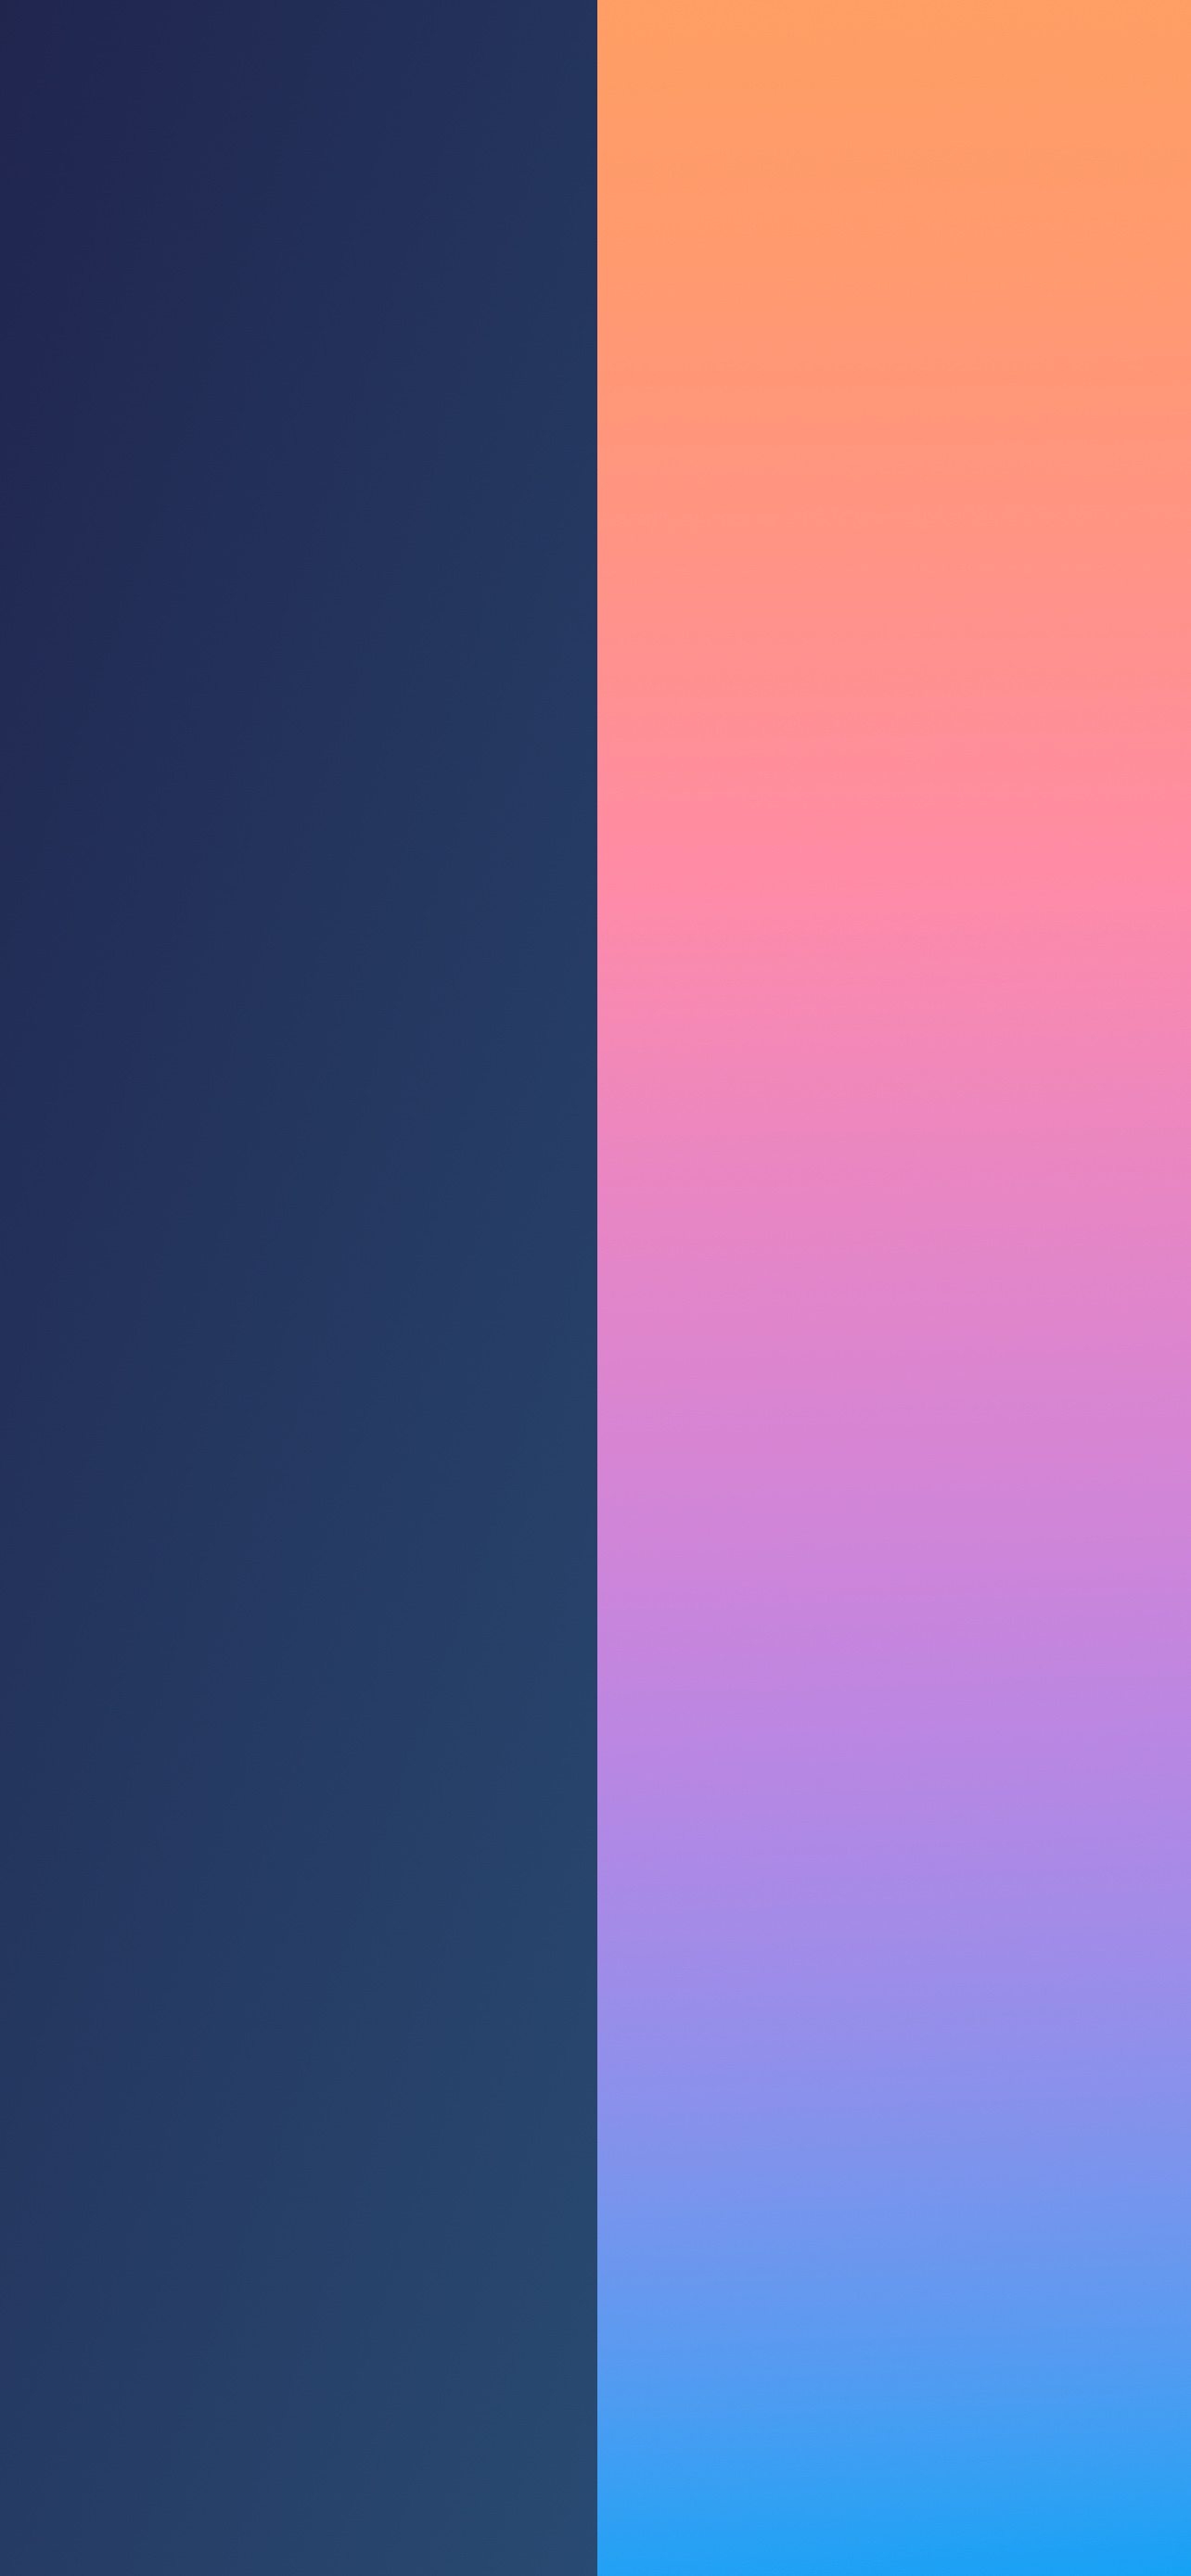 Duo iphone wallpapers with split colors